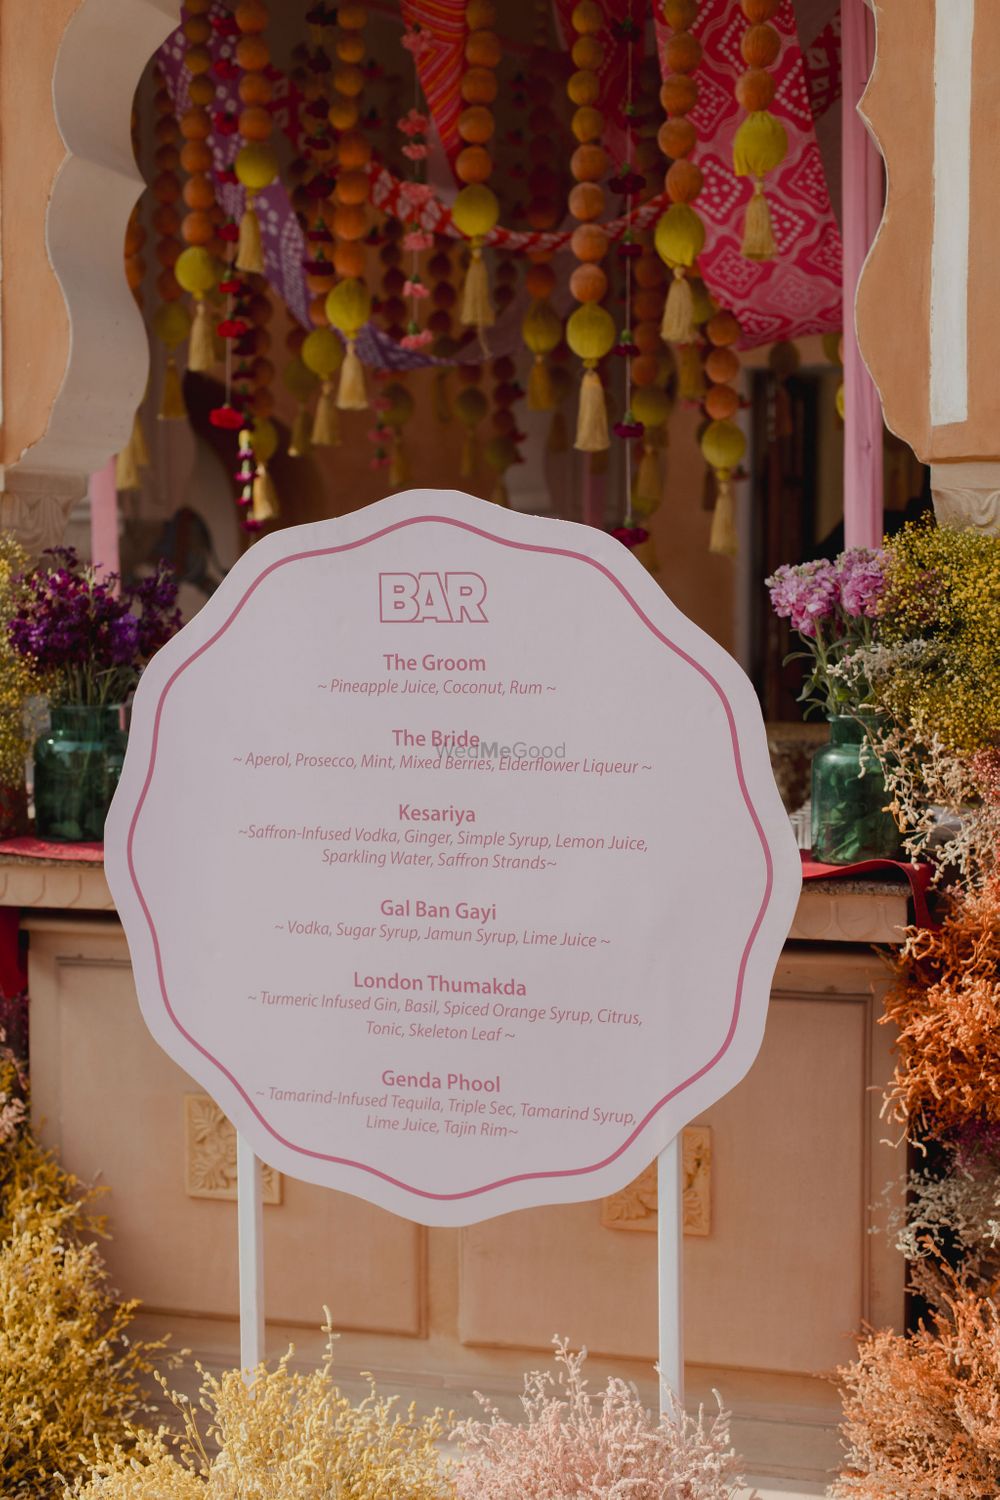 Photo of Personalised cocktail bar menu with groom and bride personalised drinks